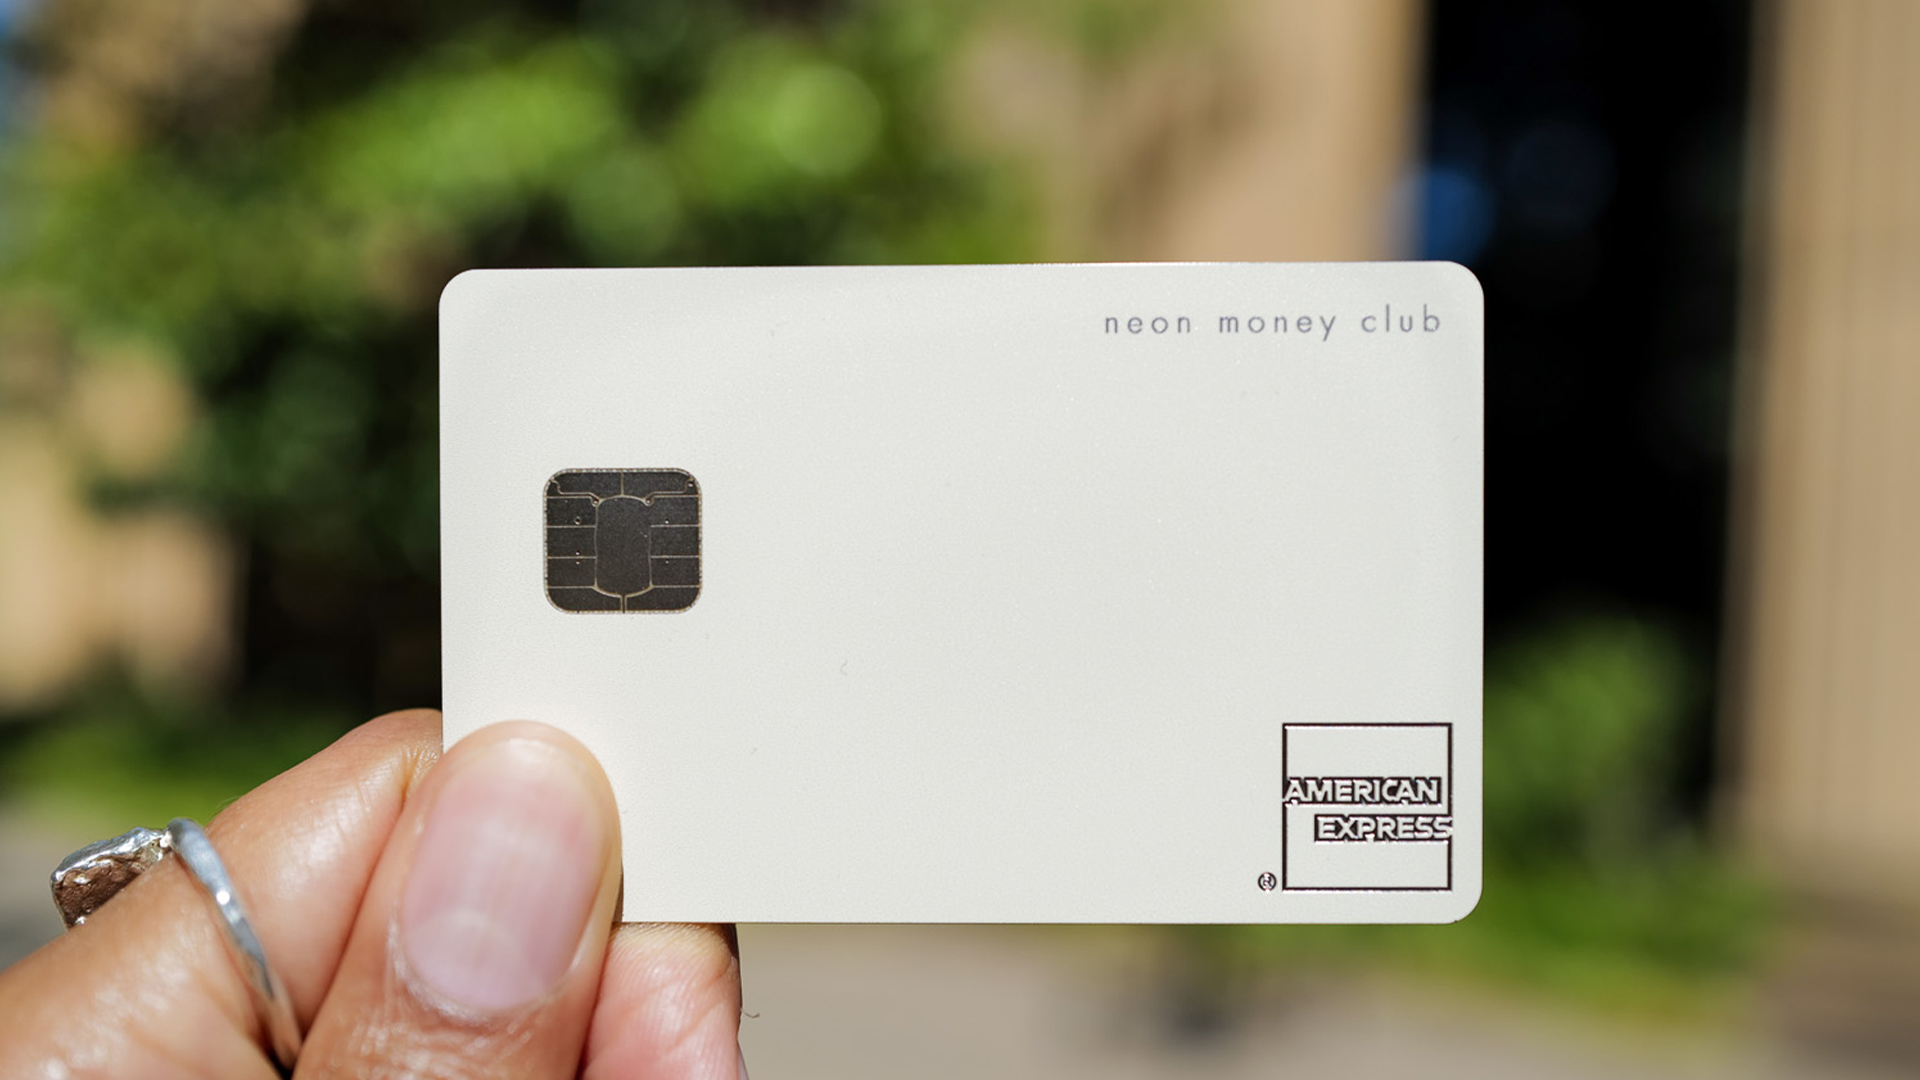 Neon Money Club Becomes The First Black-Owned Tech Company In The Us To Launch An American Express Card